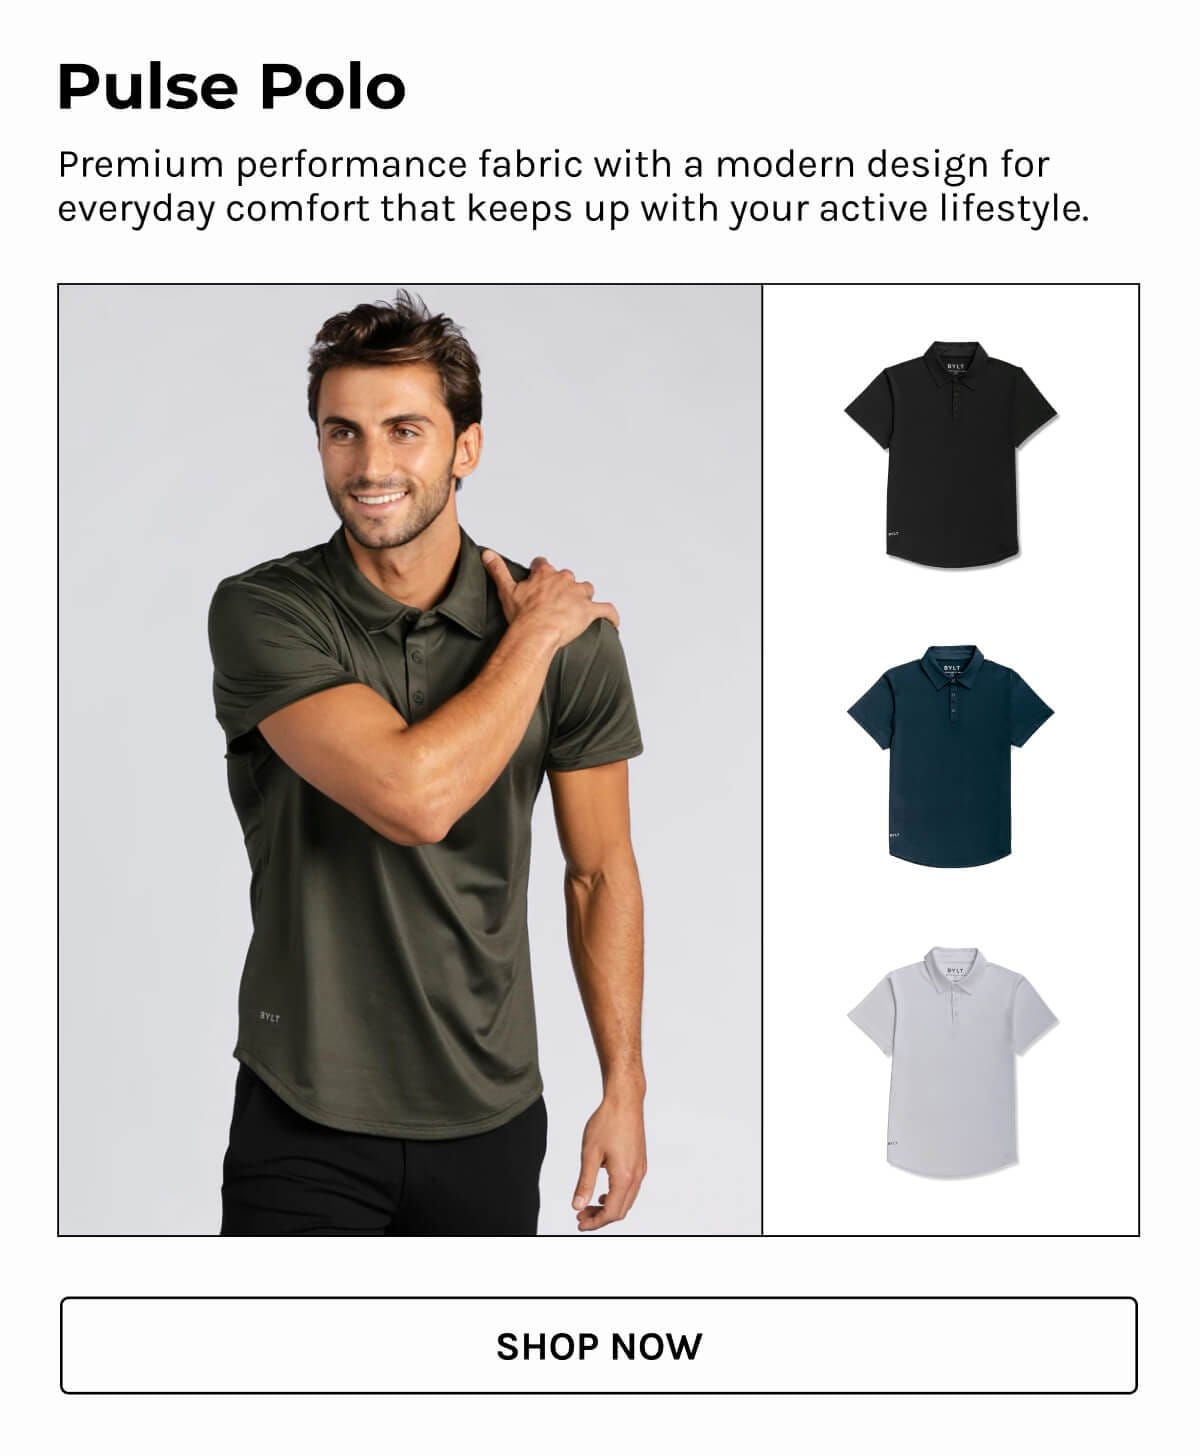 Pulse Polo: Premium performance fabric with a modern design for everyday comfort that keeps up with your active lifestyle